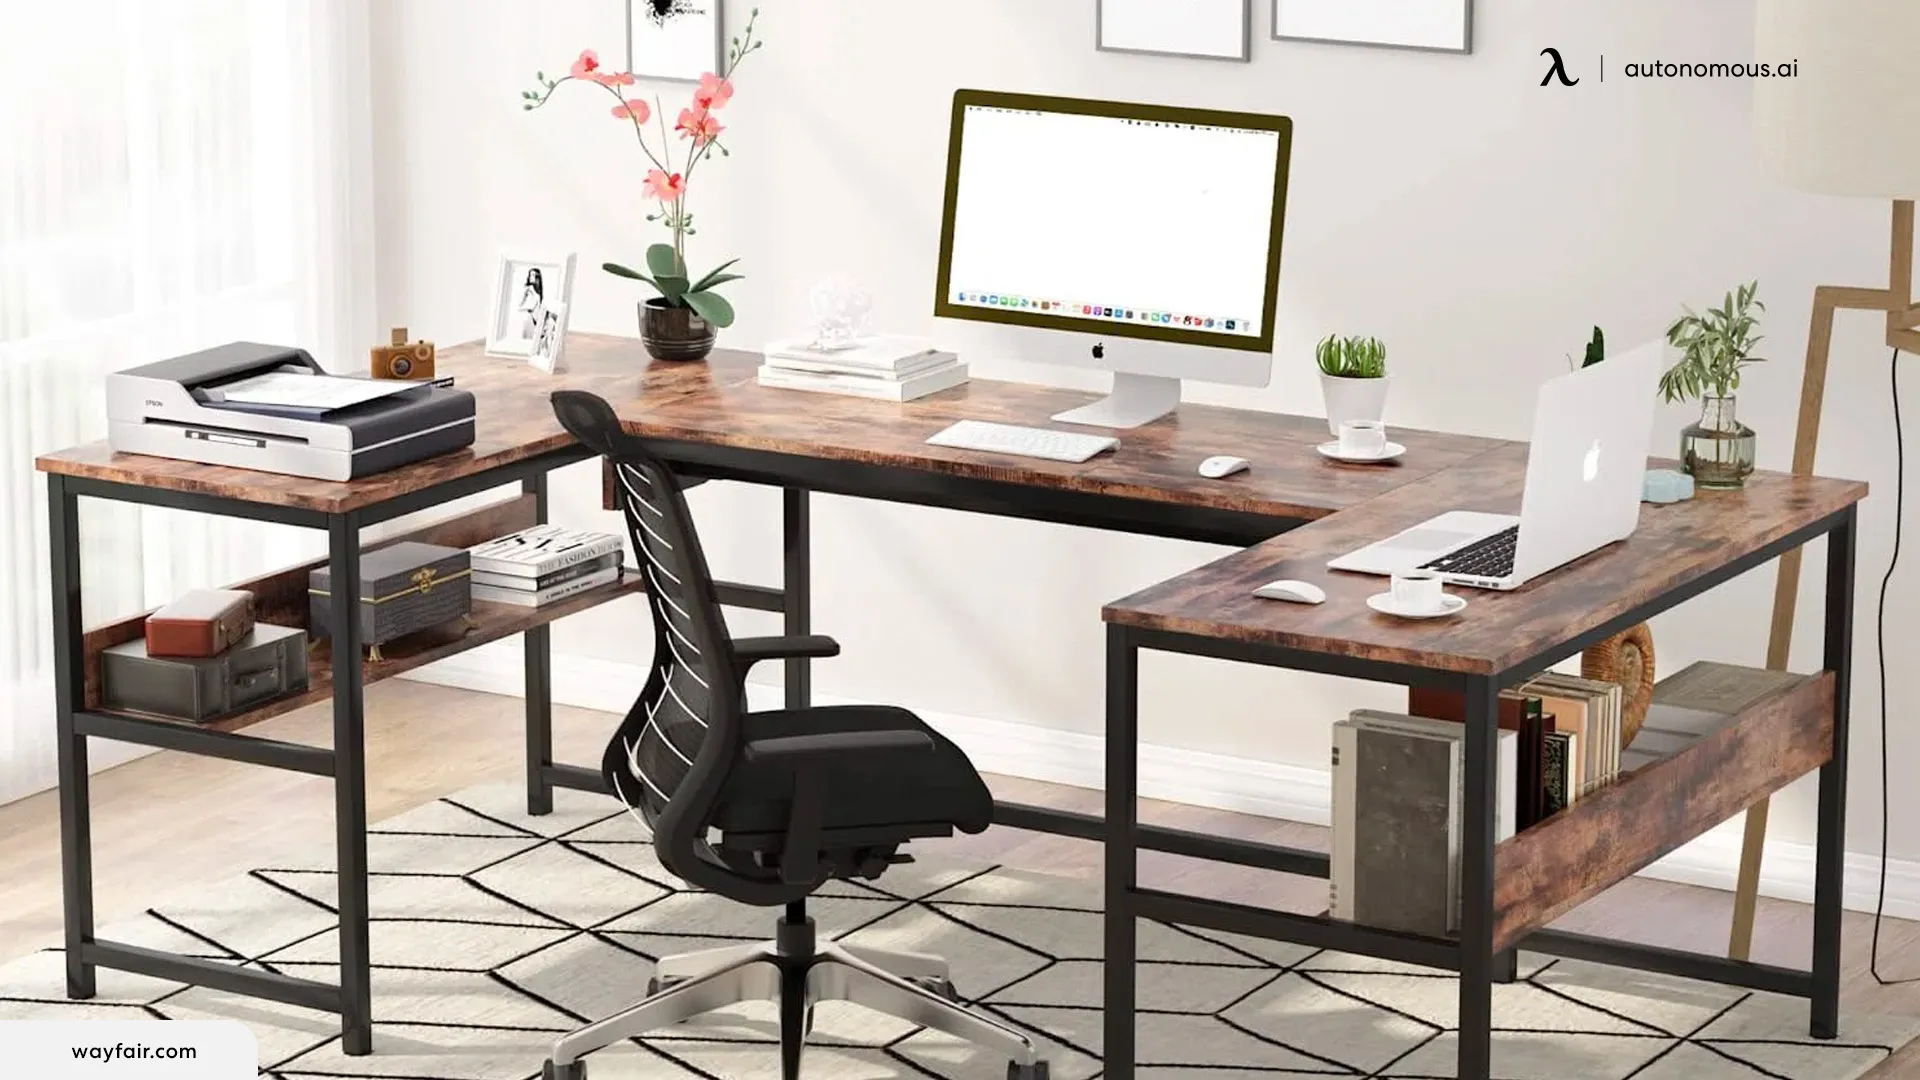 Which Types of Offices Are Perfect for an L-shaped and a U-shaped Office Desk?